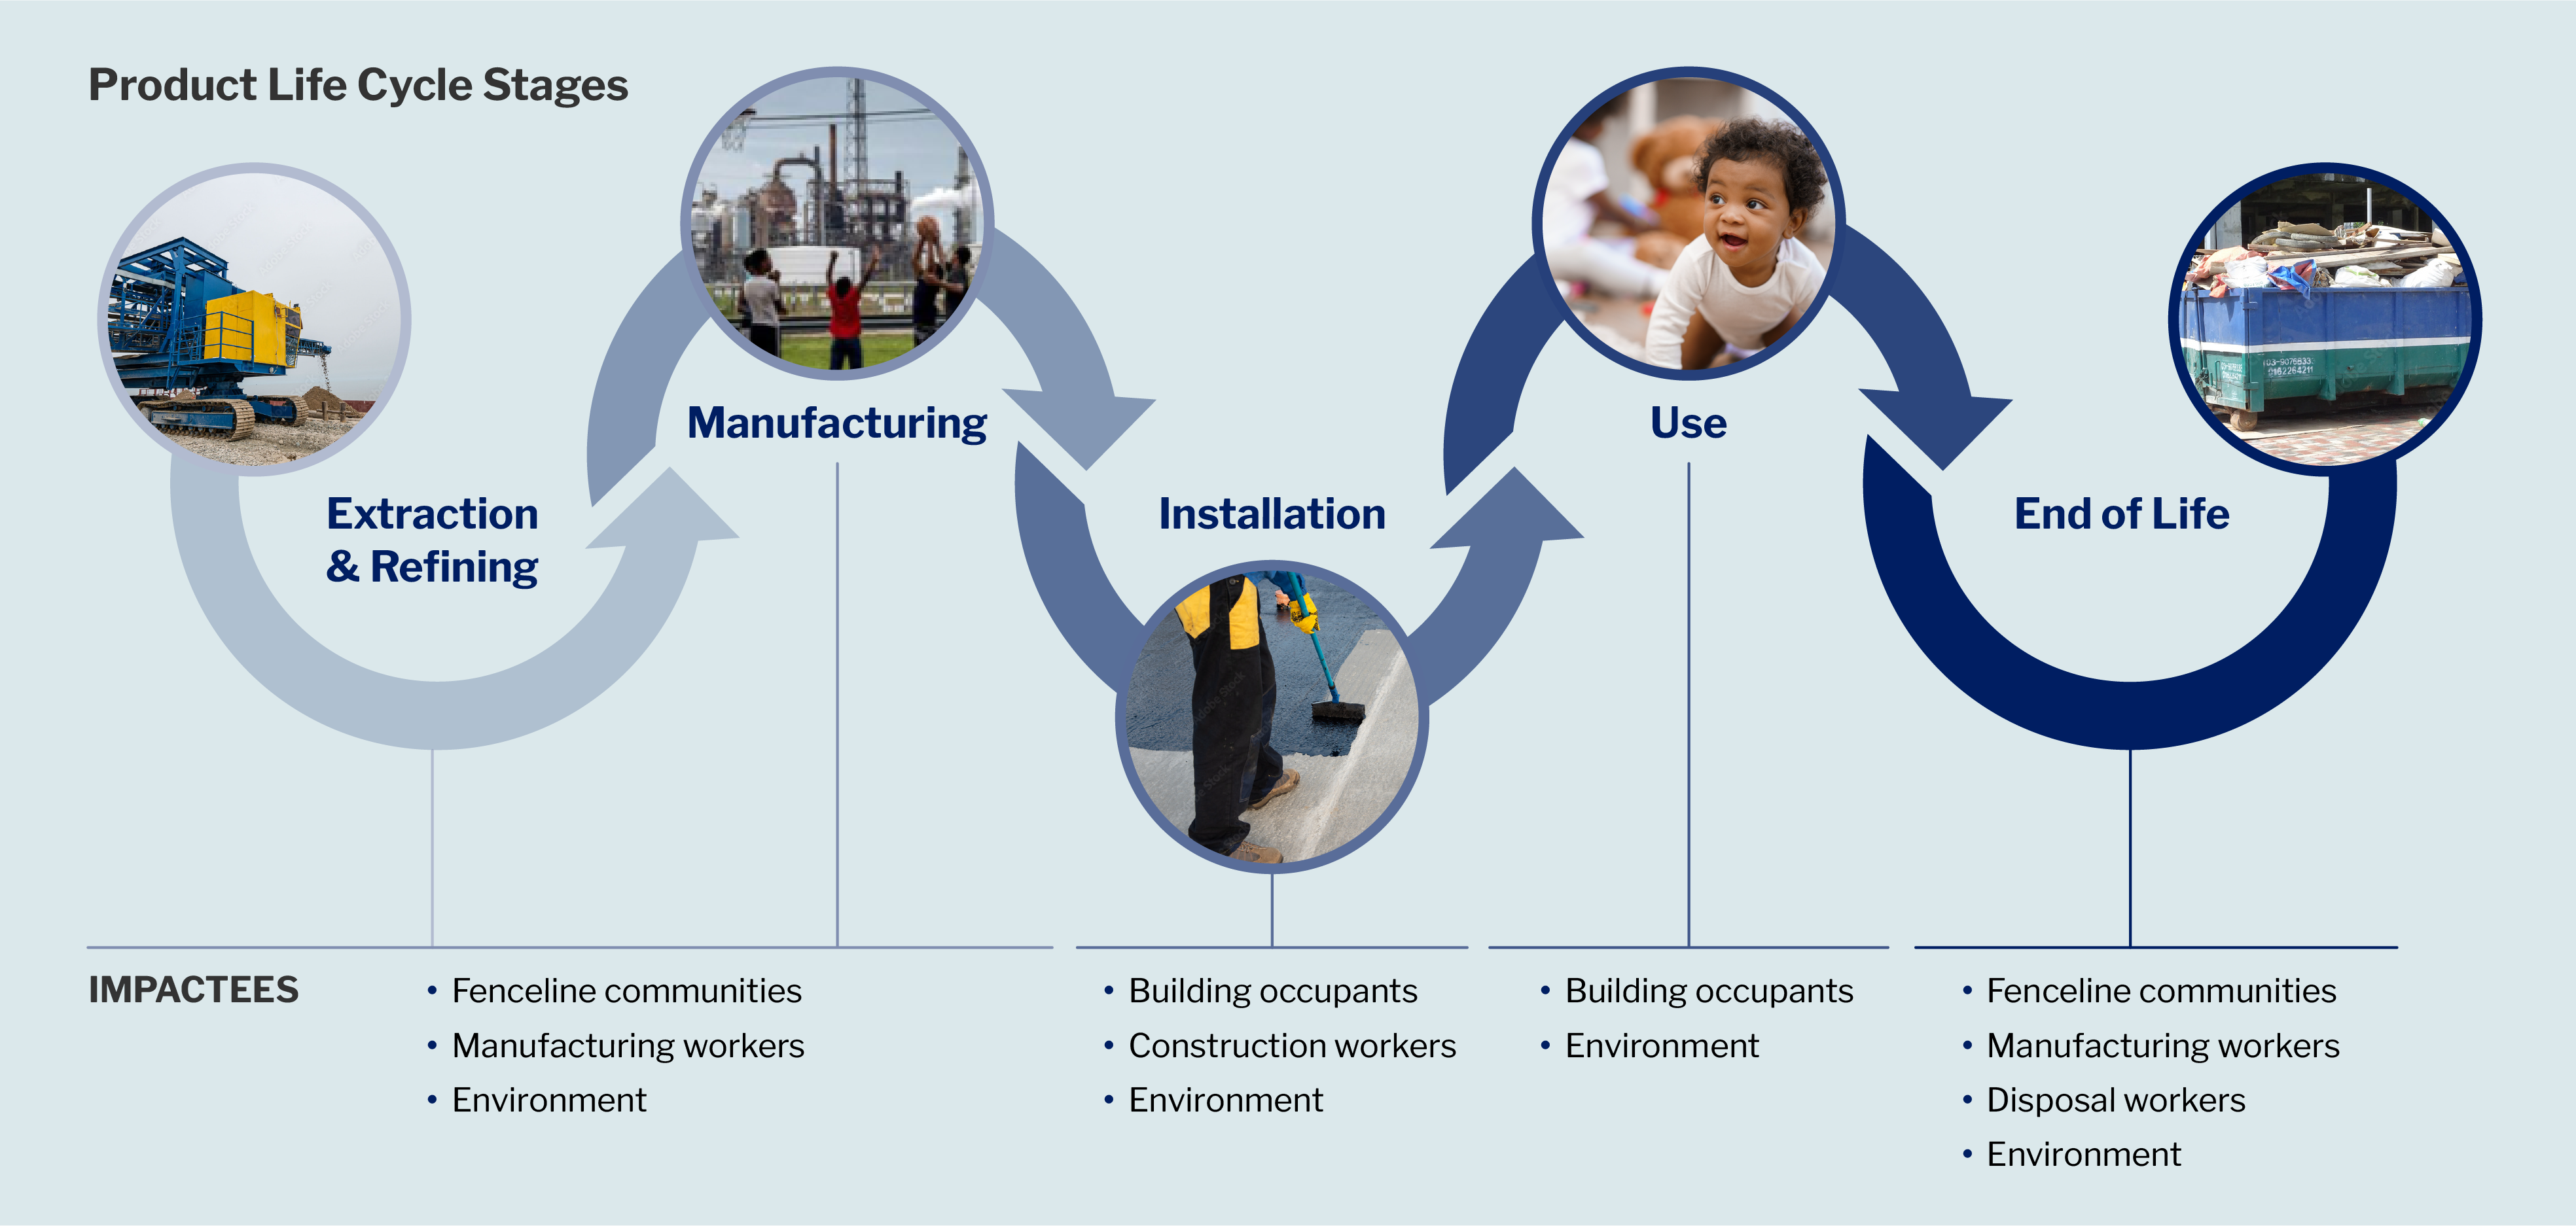 Product Life Cycle Stages Graphic. Shows impactees at each stage of product life cycle. During extraction and manufacturing, impactees are fenceline communities, manufacturing workers, and the environment. During installation, impactees are building occupants, construction workers, and the environment. During use, impactees are building occupants and the environment. During end of life, impactees are fenceline communities, manufacturing workers, disposal workers, and the environment.